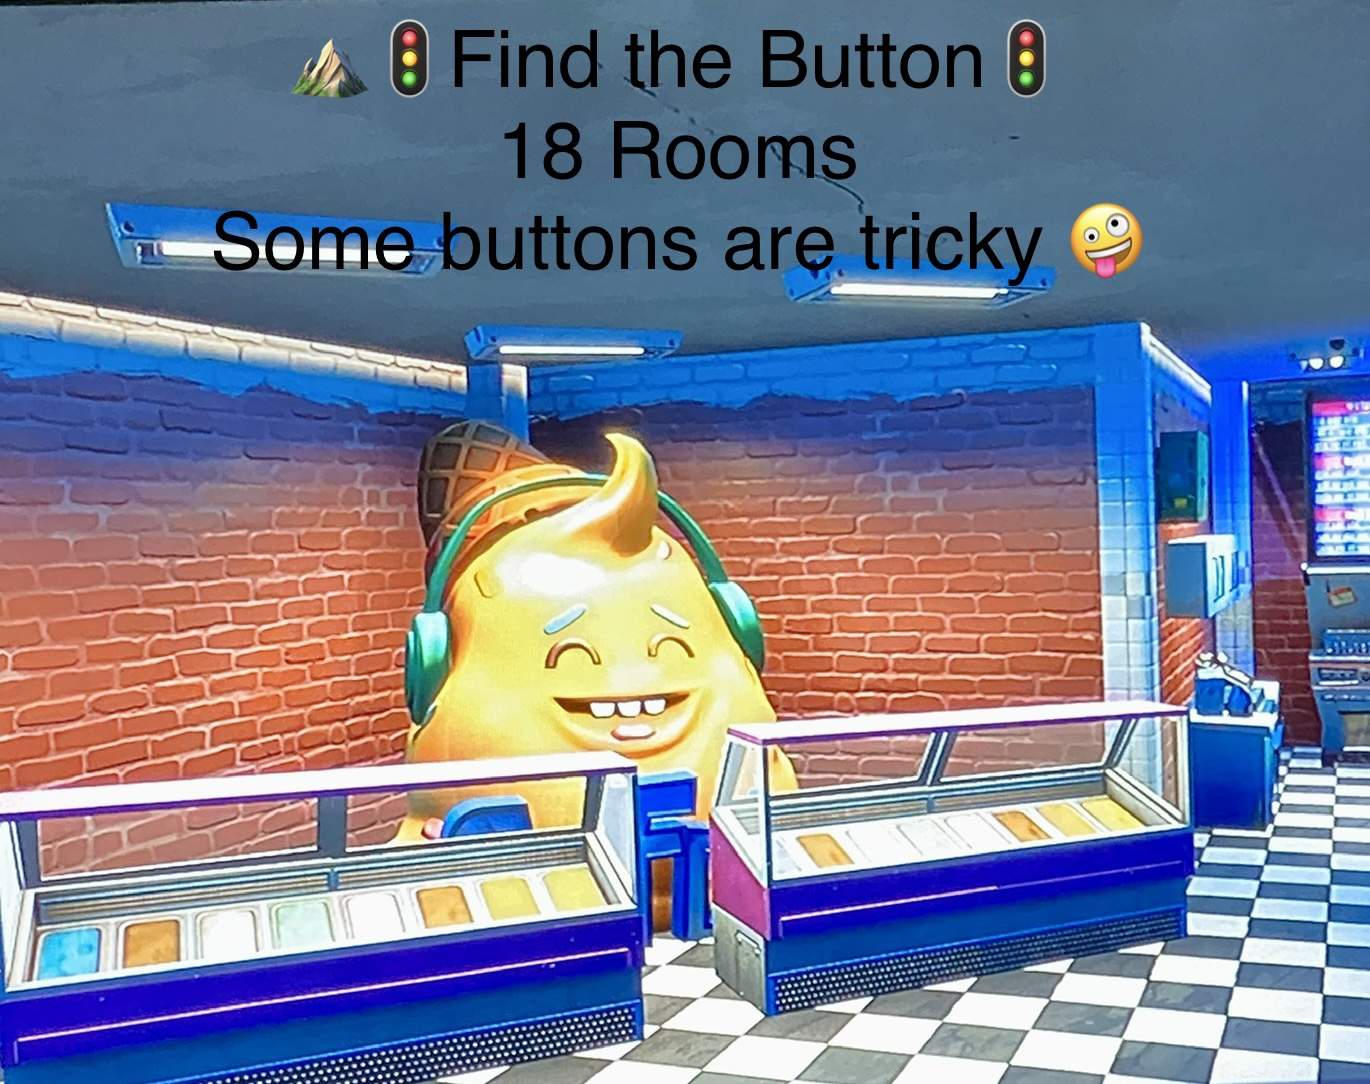 <<< FIND THE BUTTON >>>